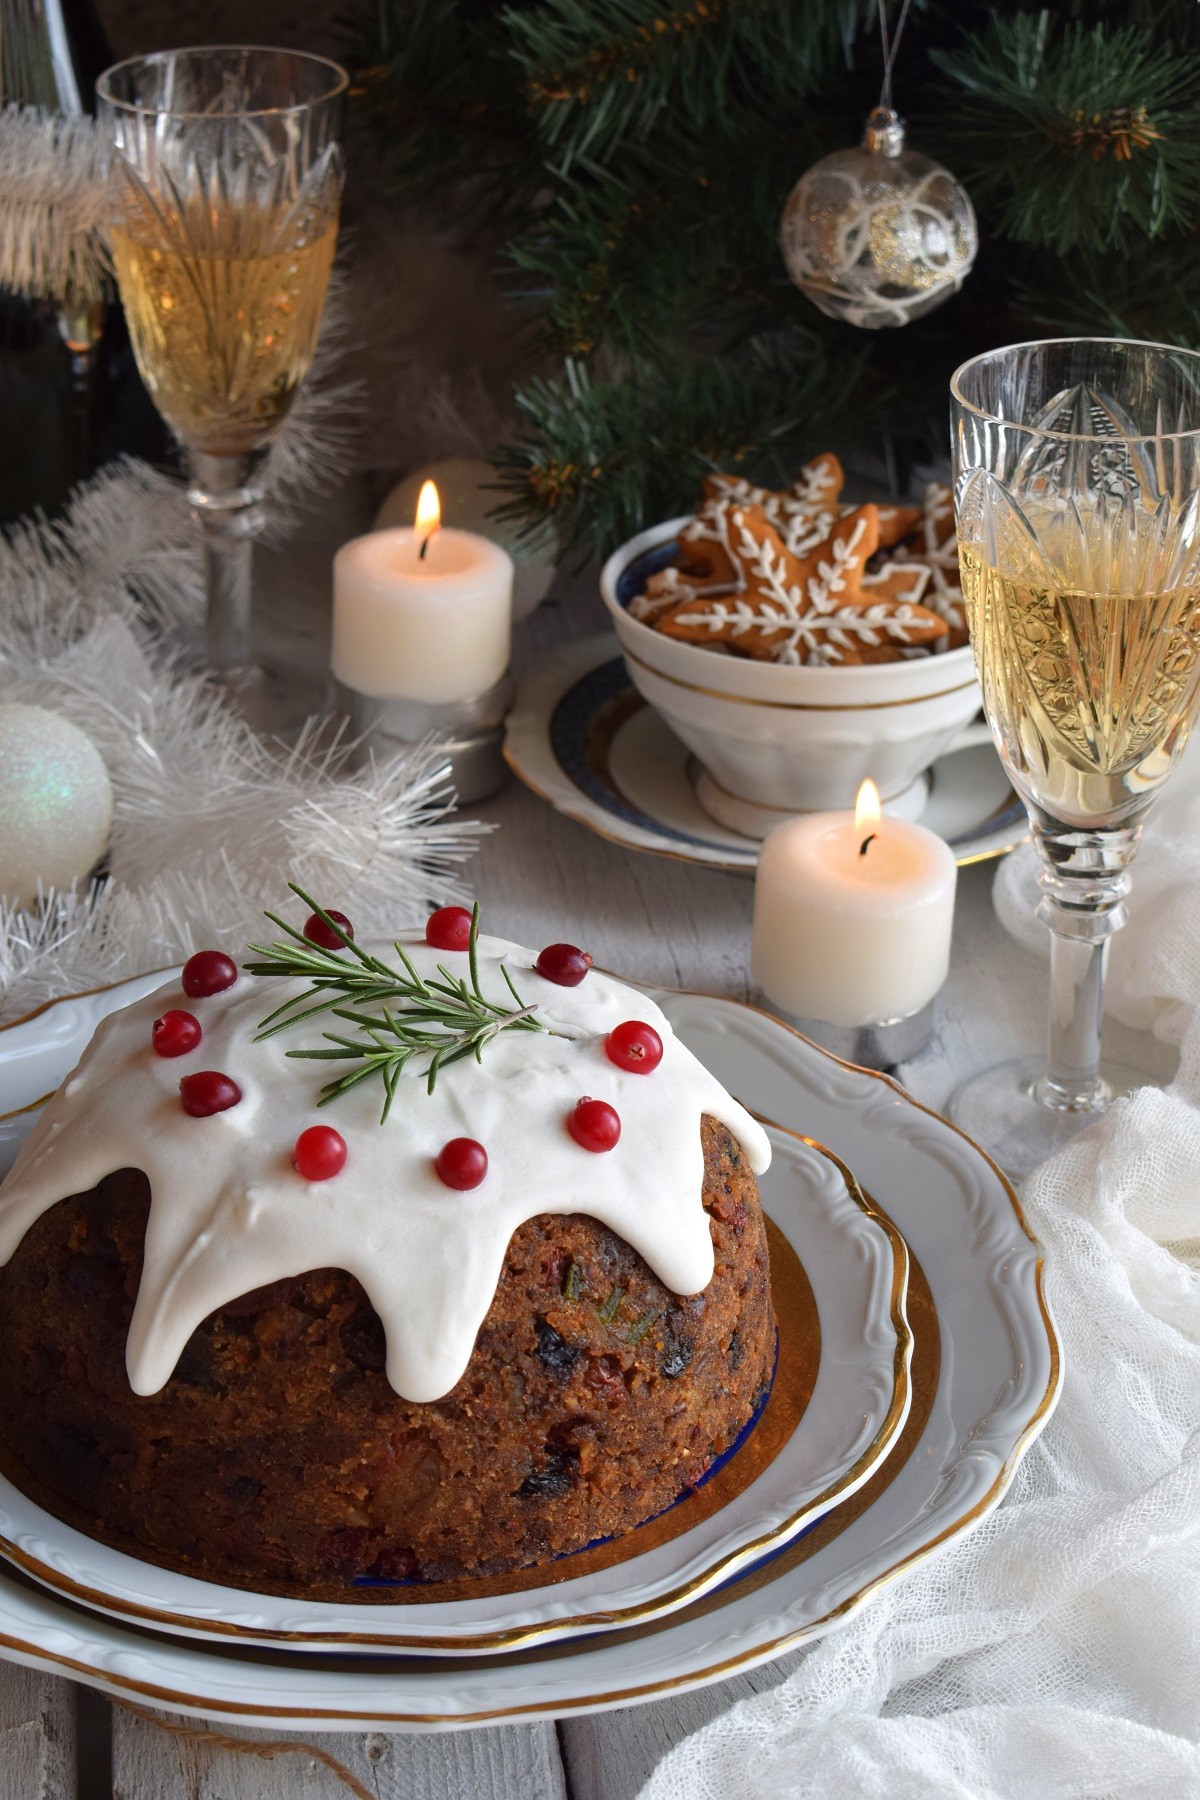 Traditional english Christmas steamed pudding with winter berries, dried fruits, nut in festive setting with Xmas tree, burning candle and glass of white wine, champagne. Fruit cake